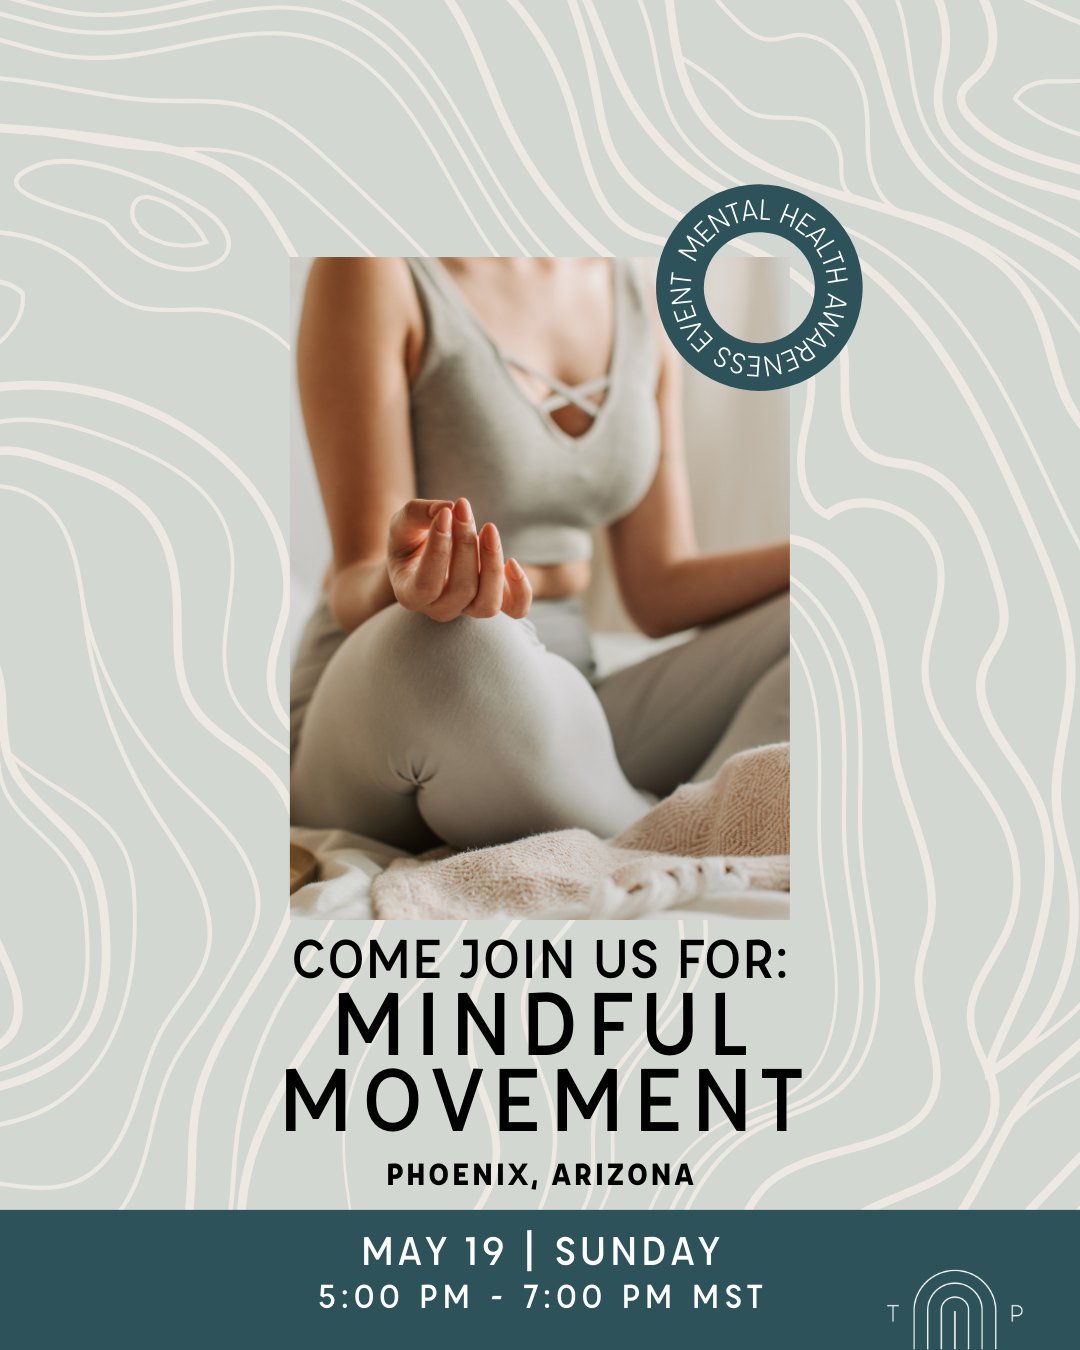 You don't want to miss this!

Come join us for a breath work, sound healing and restorative movement at Mindful Movement.

Join us at @desert_mvmt with guest facilitators @michaela.rose.claussen , @kelseyk0nig , @cosmiccoaching_ and @brittnyking_ for